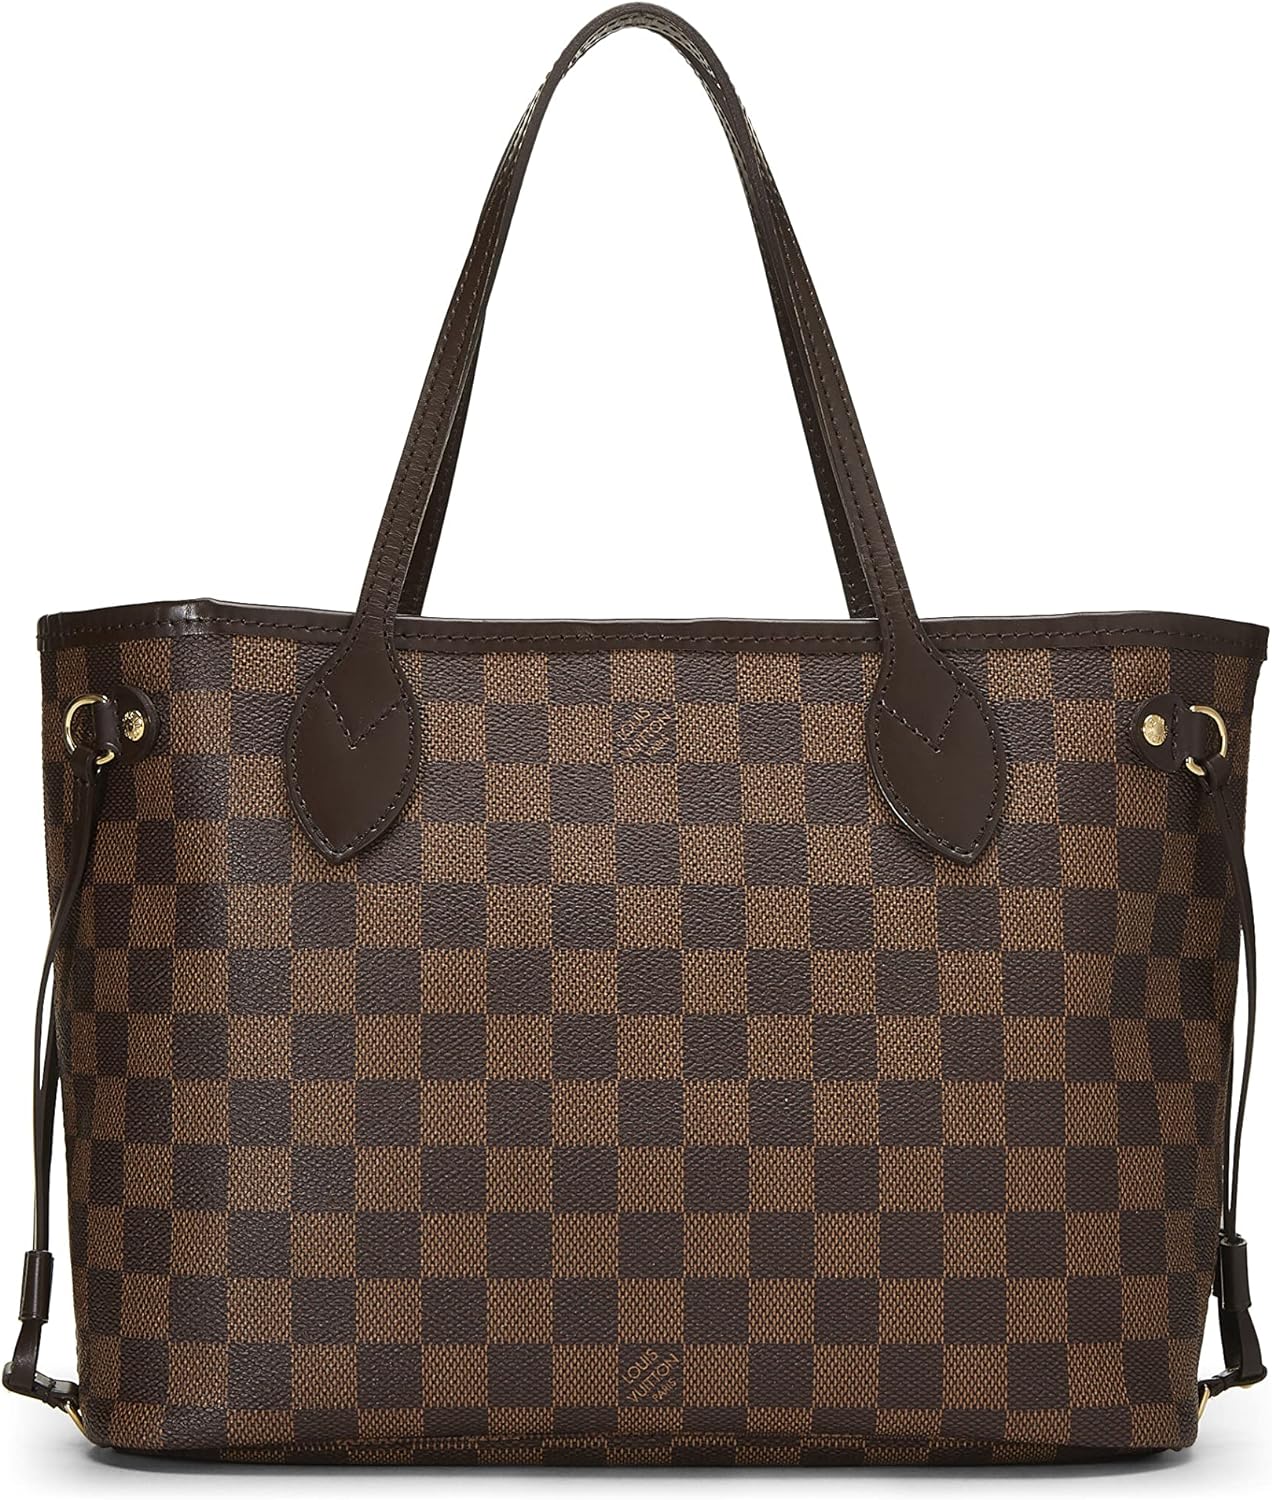 Louis Vuitton Neverfull PM Bag Review 4